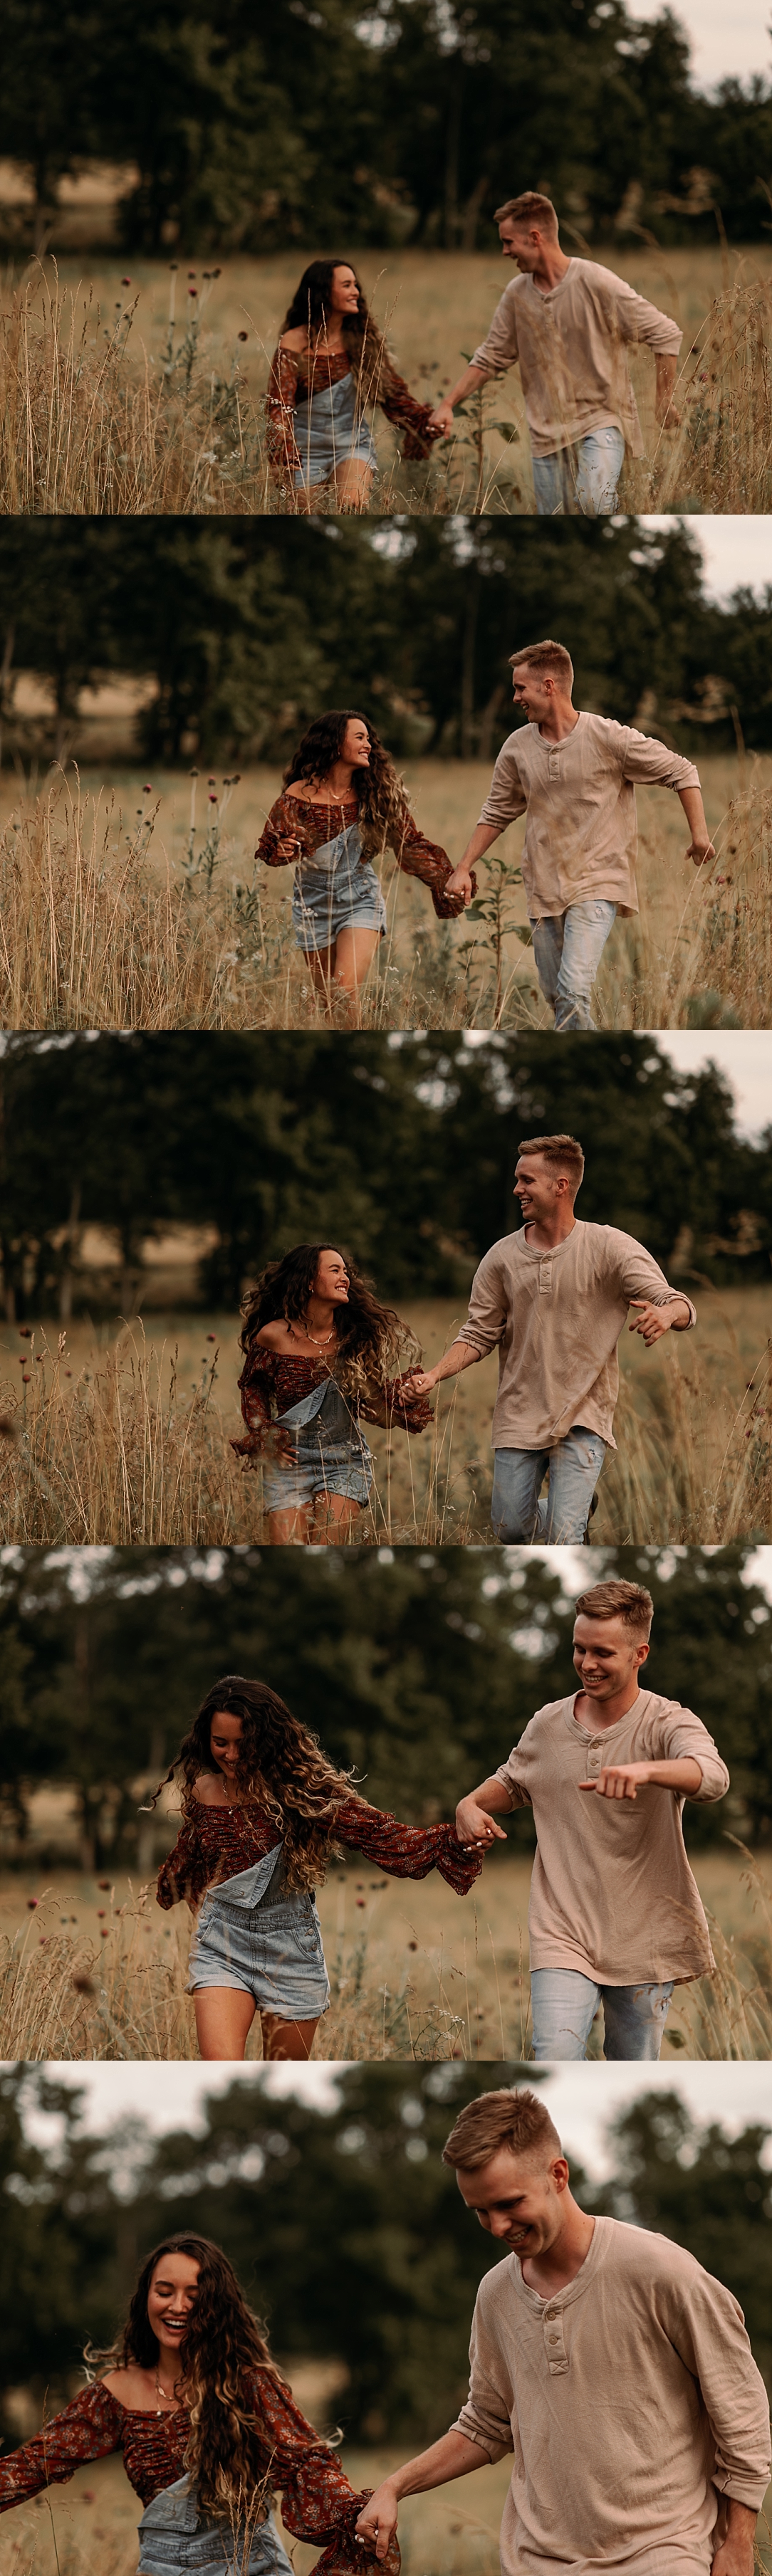 playful summer country field couple session_0049.jpg